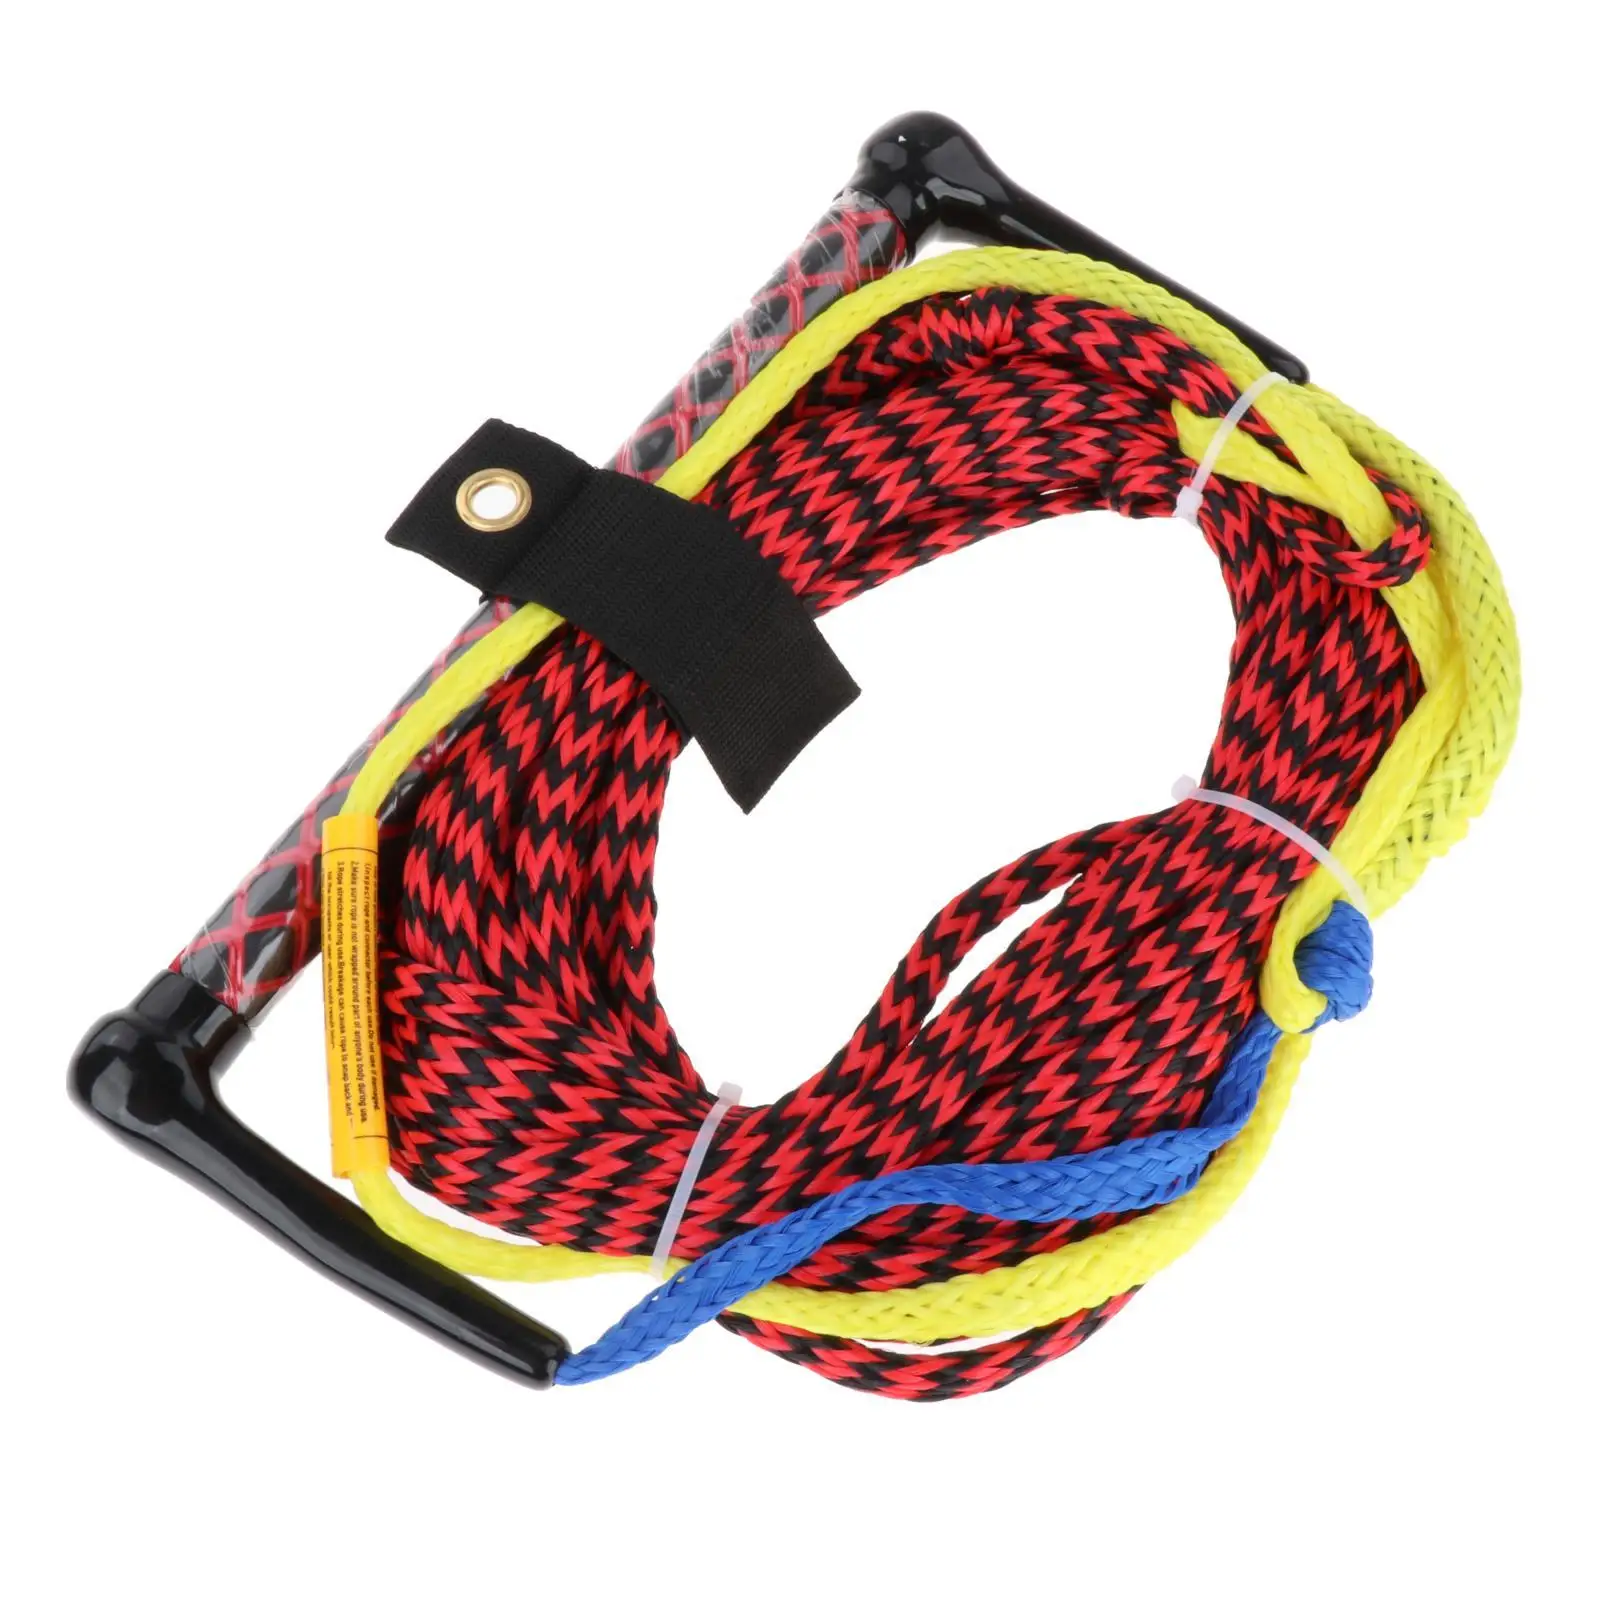 Water Ski Surfing Rope Floating Accs 23M with Handle for Wakeboard Kneeboard